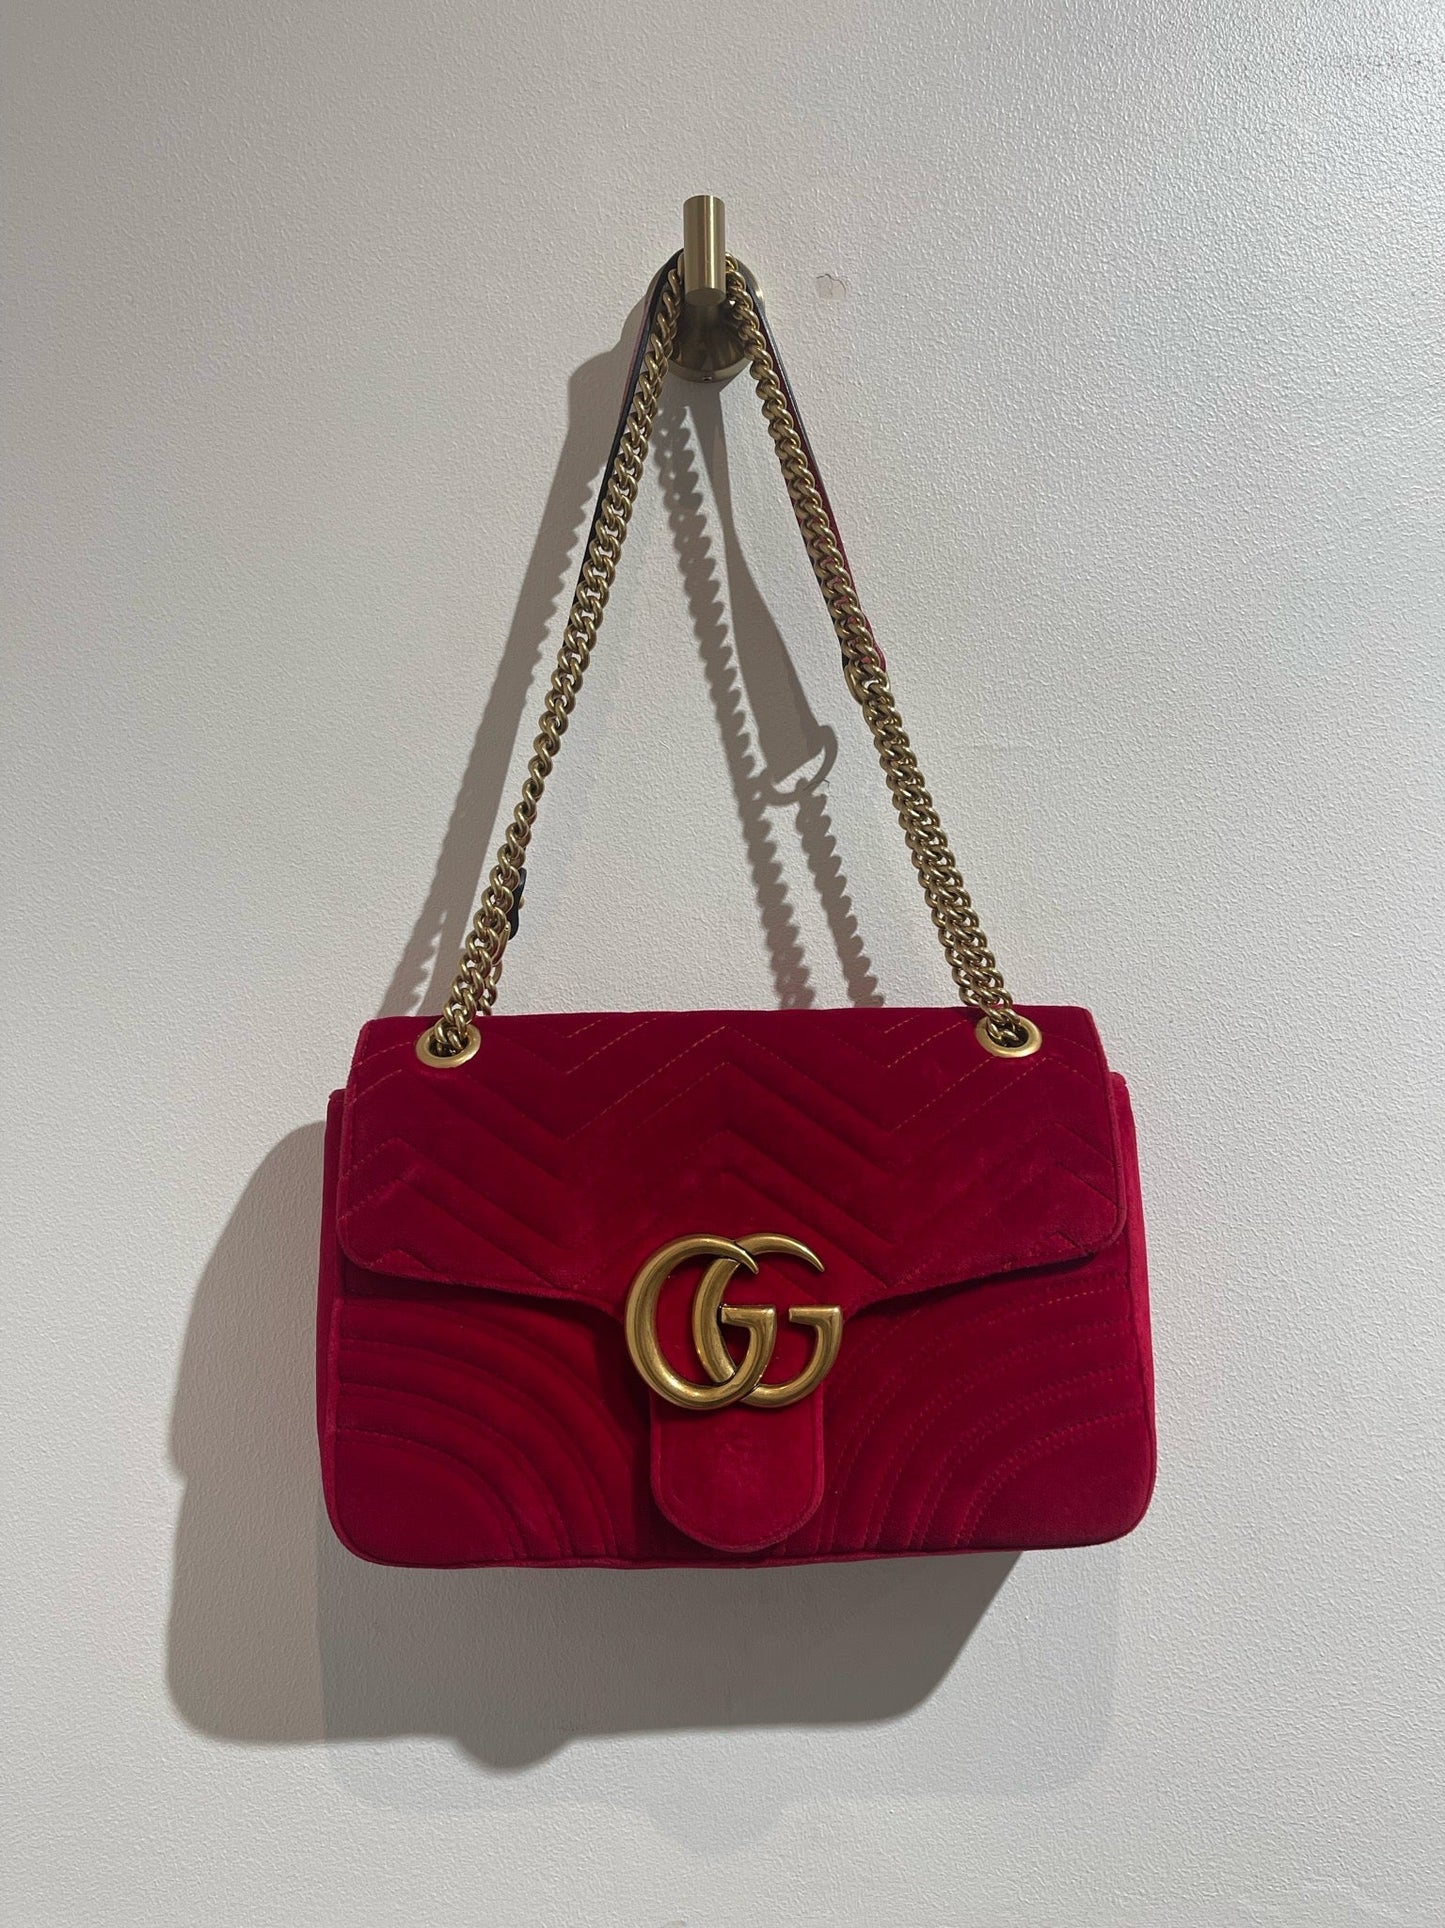 Sac Gucci Marmont rouge